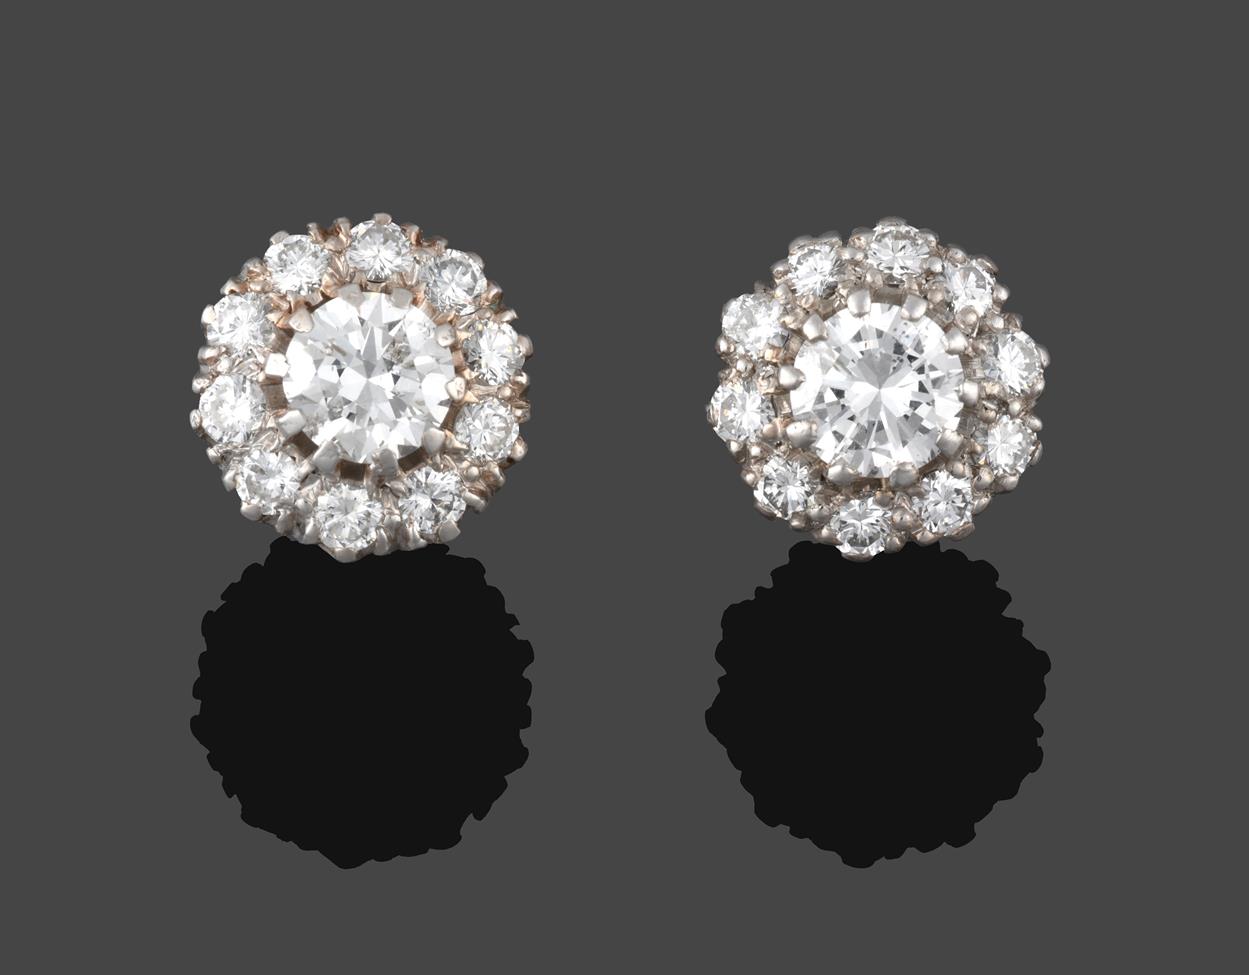 Lot 220 - A Pair of Diamond Cluster Earrings, a raised central round brilliant cut diamond within a border of